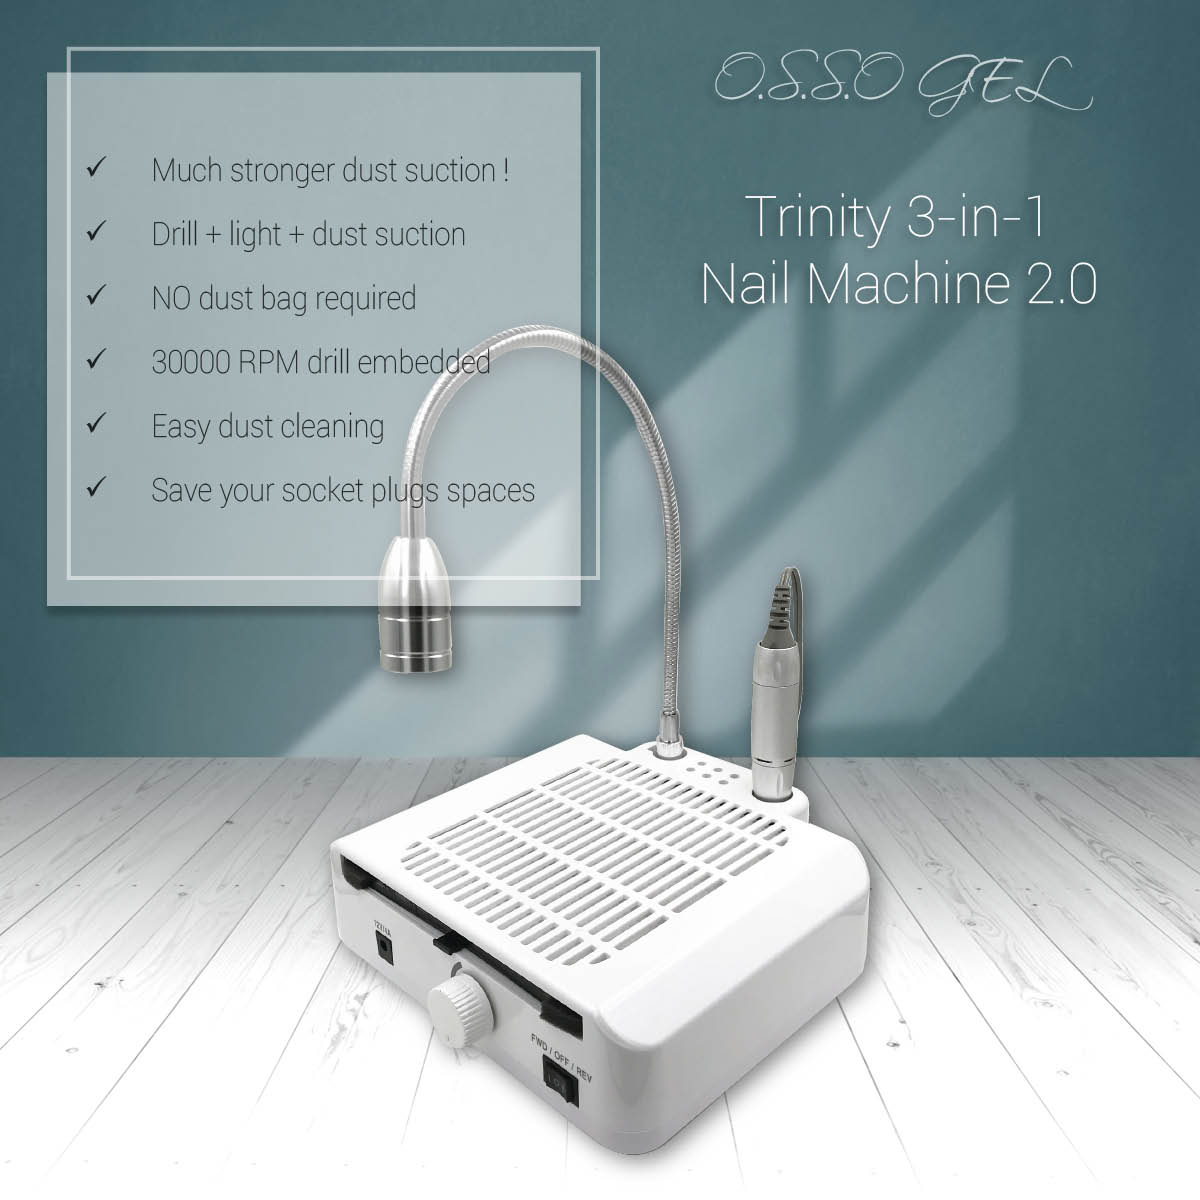 3-in-1 Nail Dust Collection and Drill 2.0